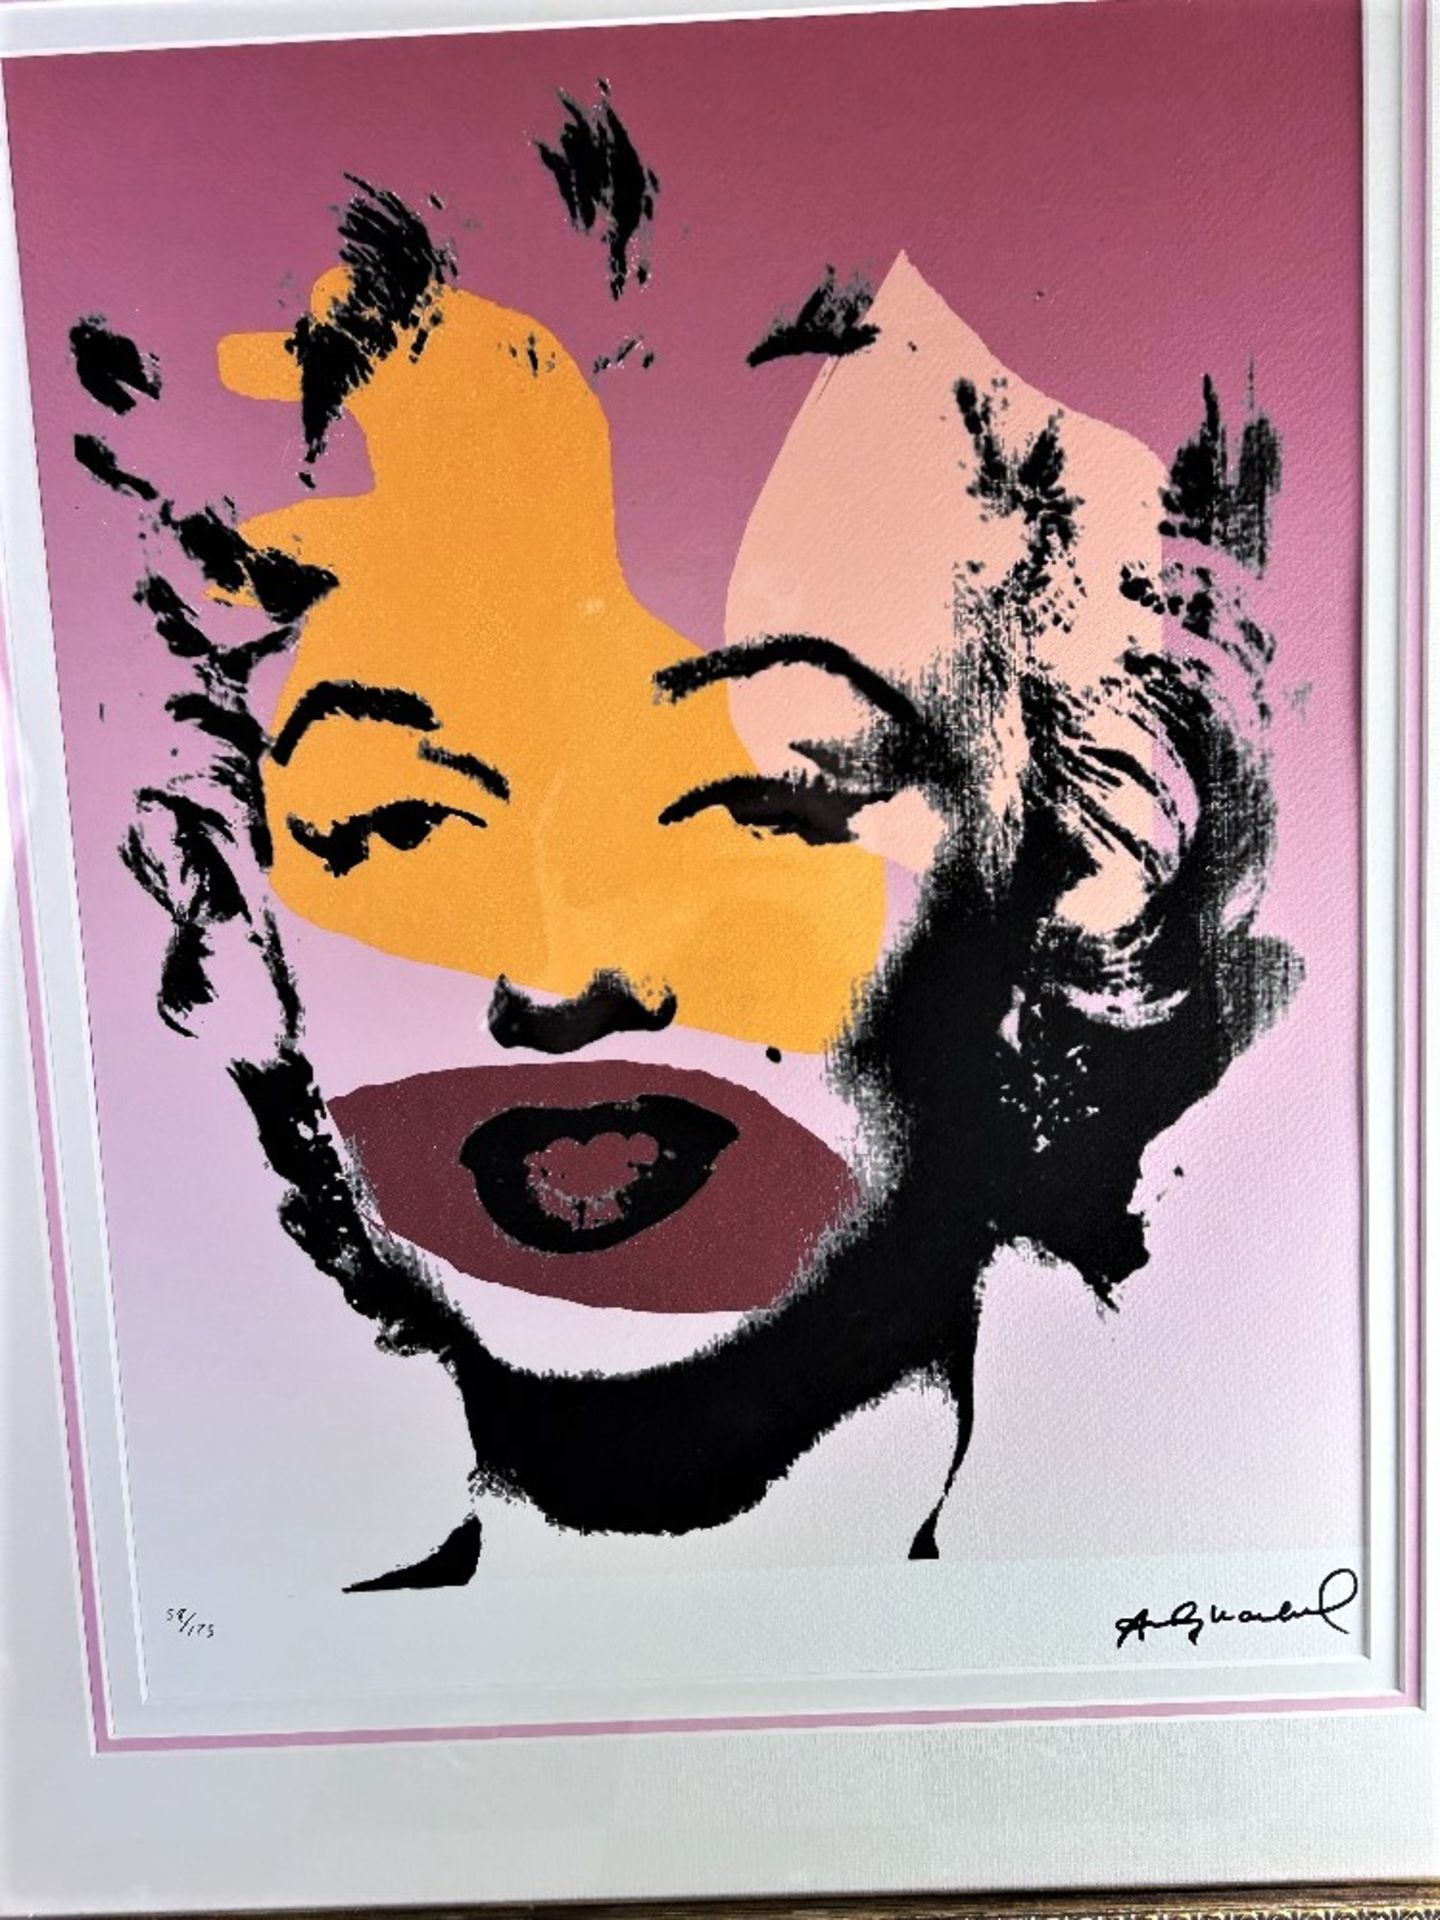 Andy Warhol-(1928-1987) "Marilyn" Numbered Lithograph - Image 2 of 7